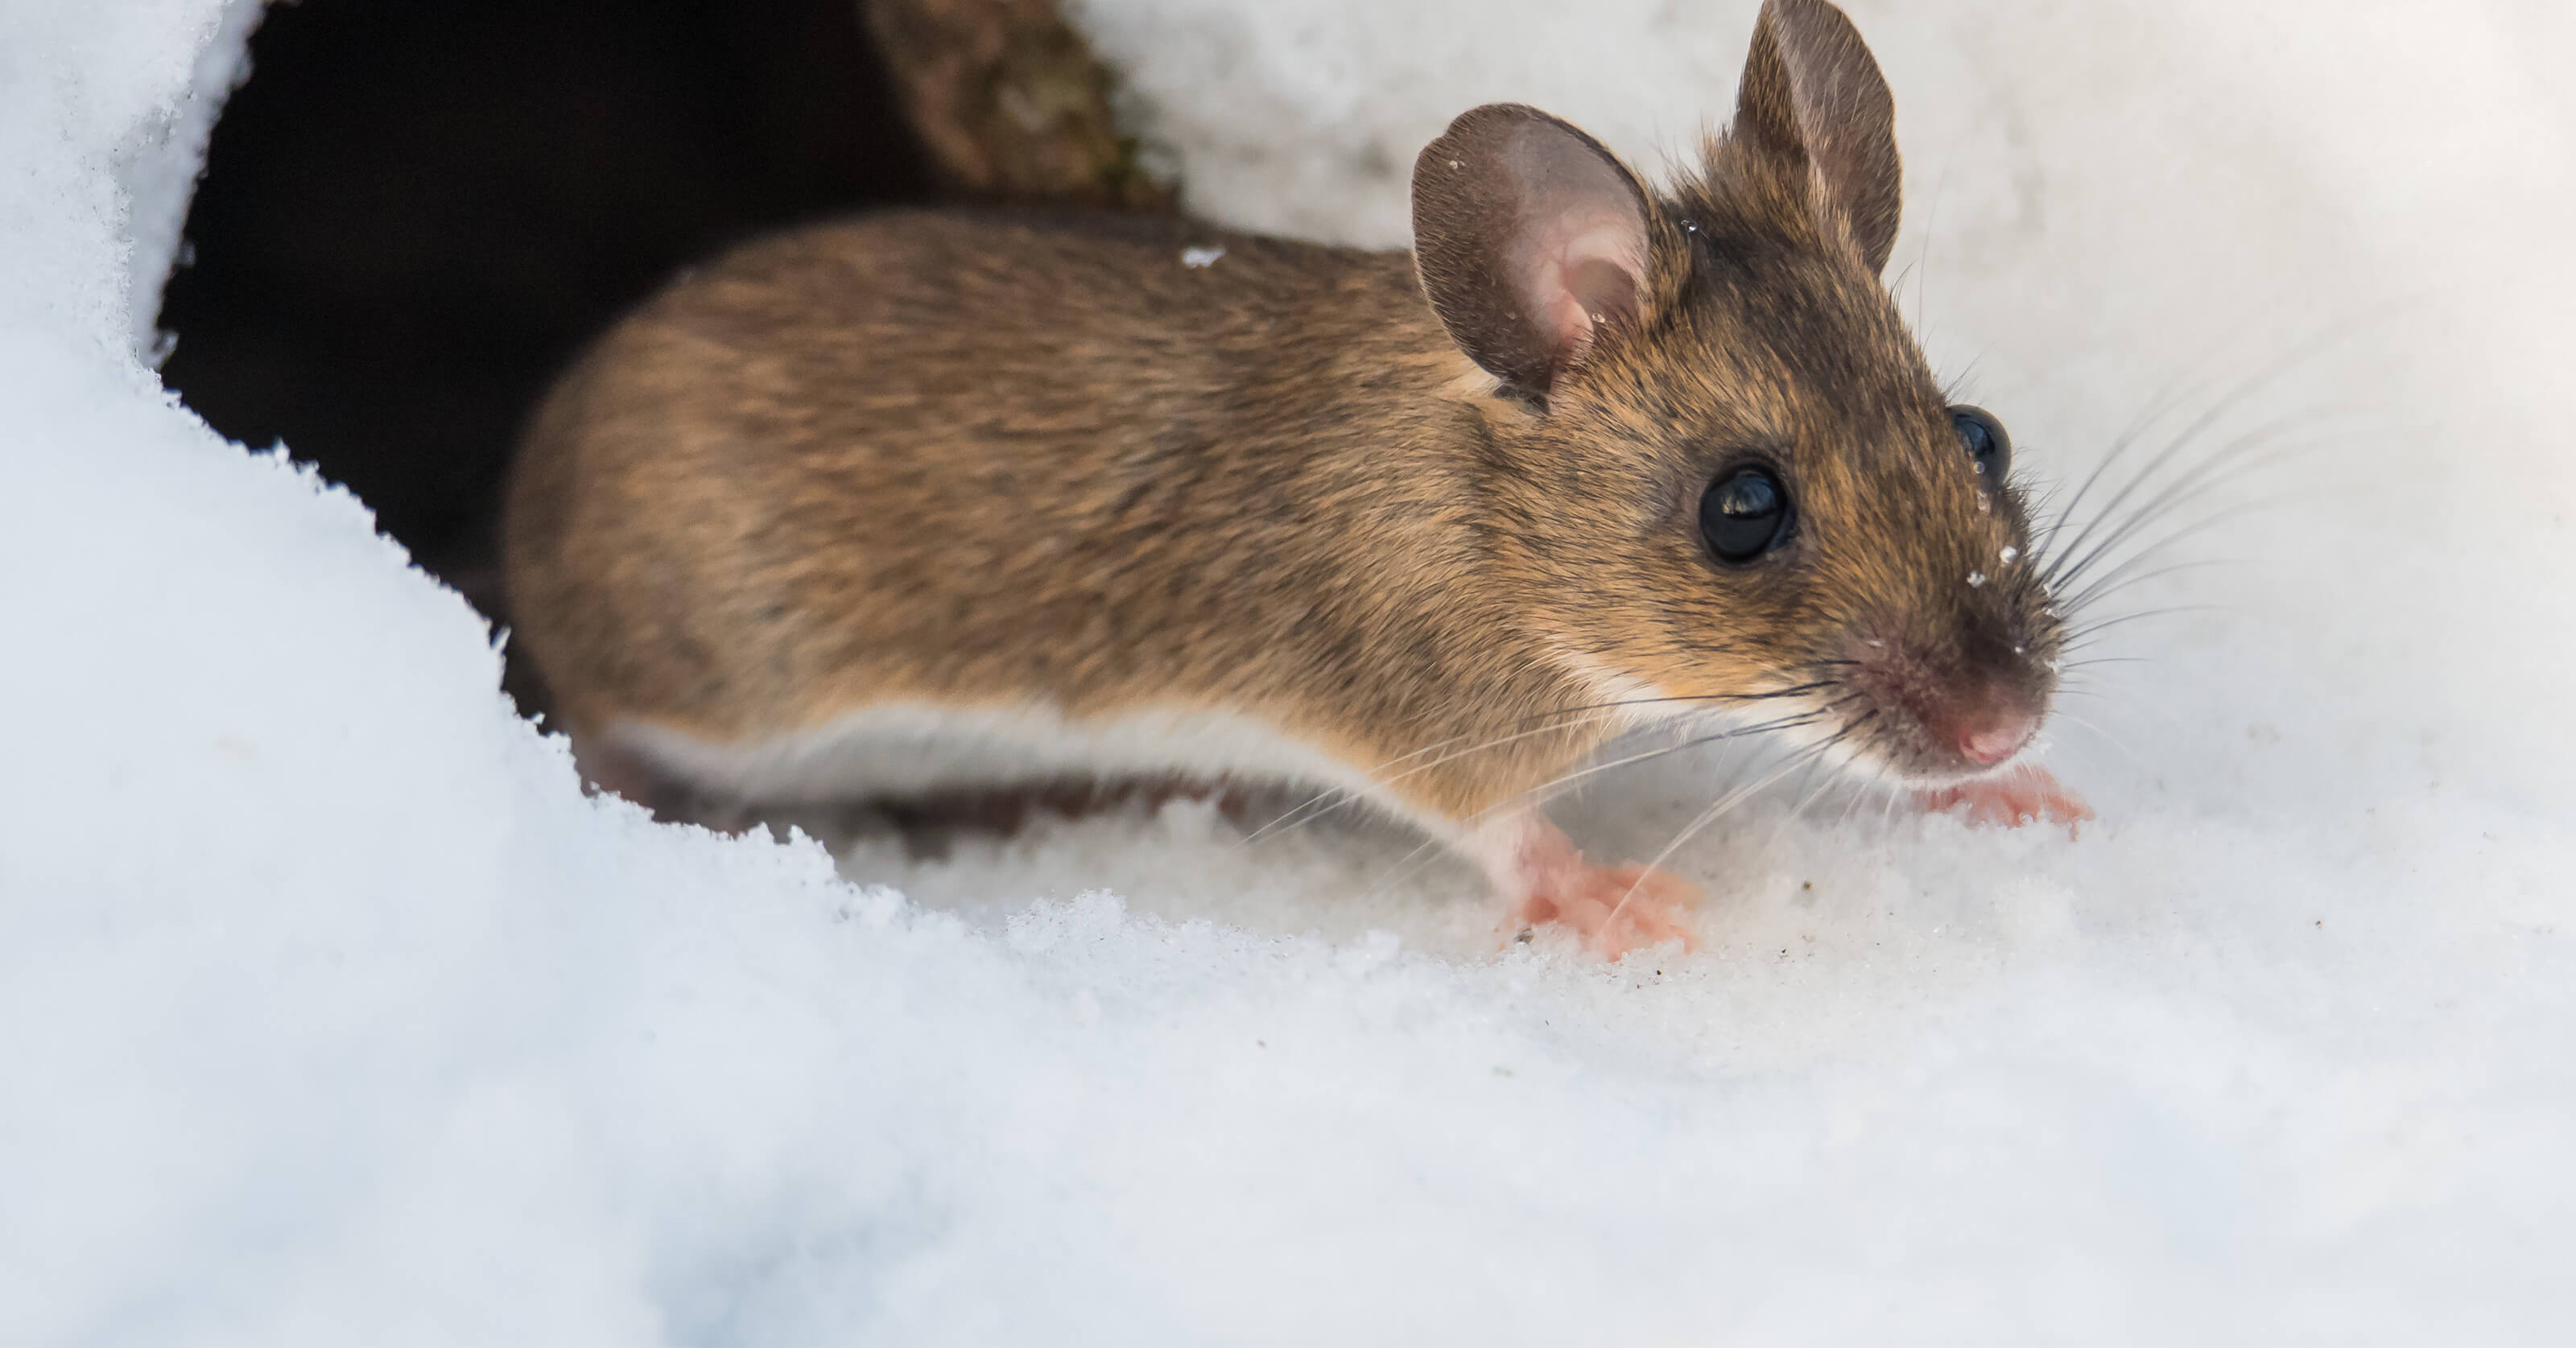 4 Pests That Might Invade You This Winter